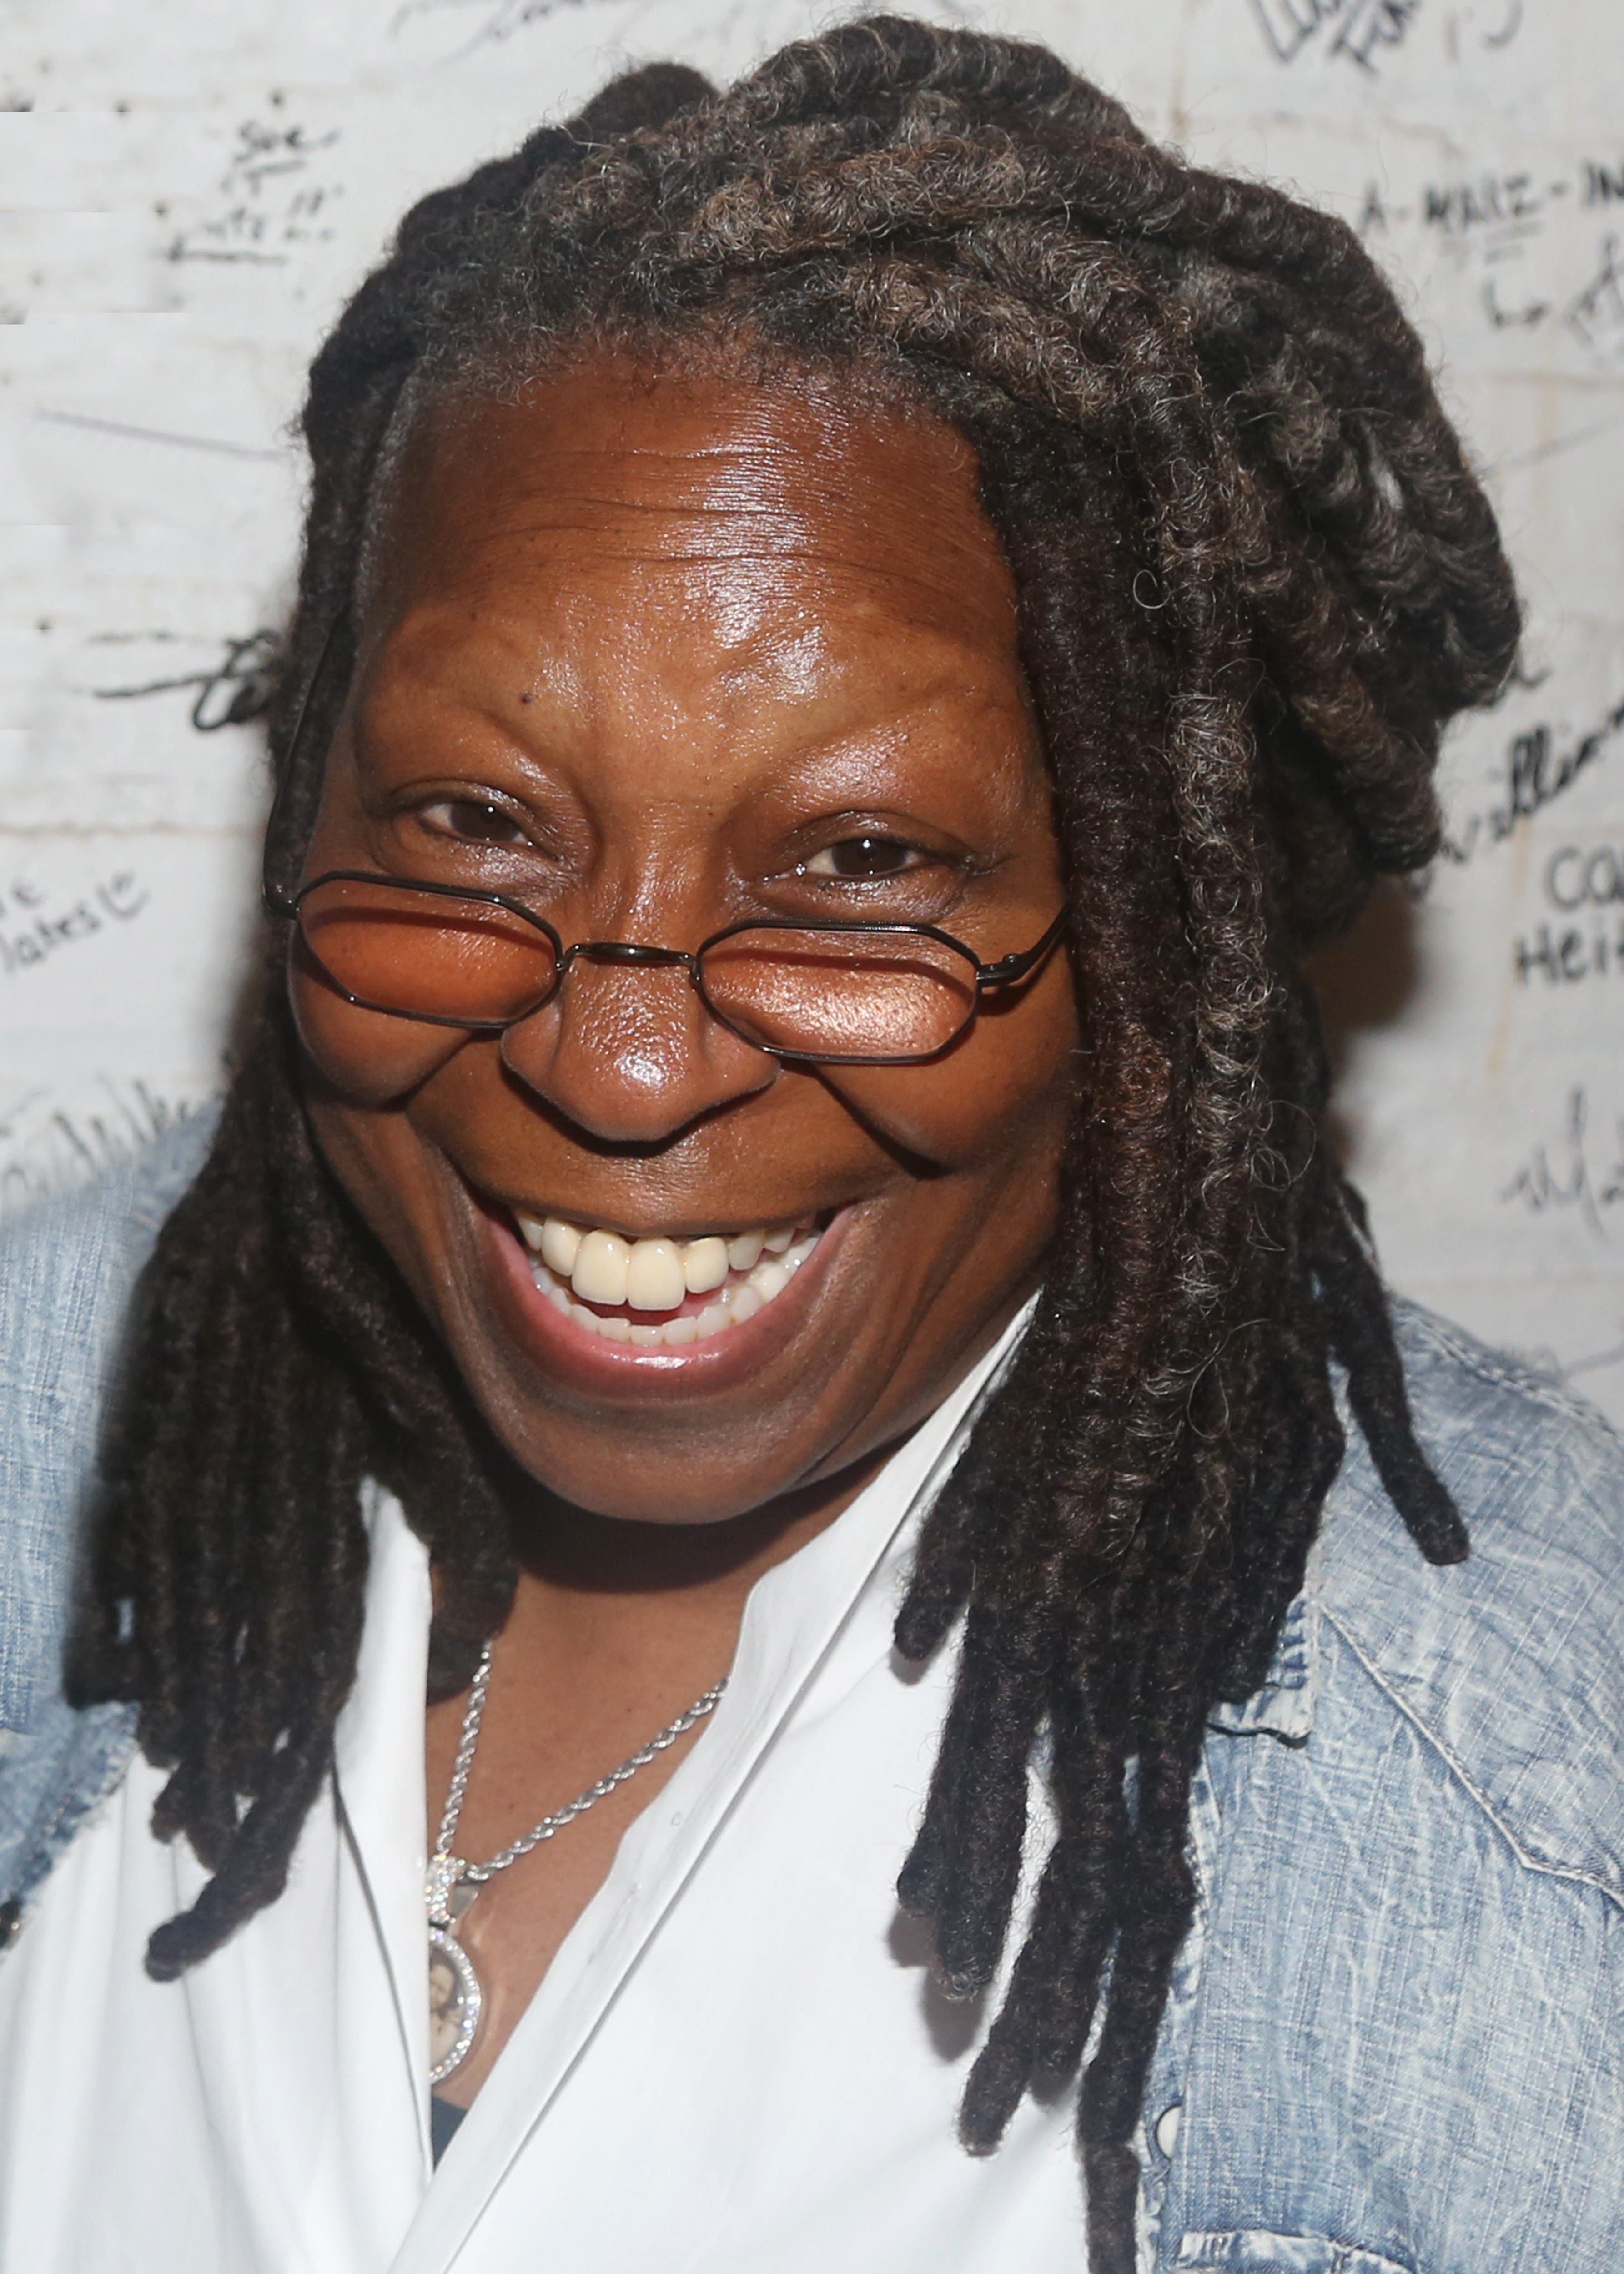 Whoopi Goldberg backstage at the "Shucked" Broadway musical in New York City, 2023 | Source: Getty Images